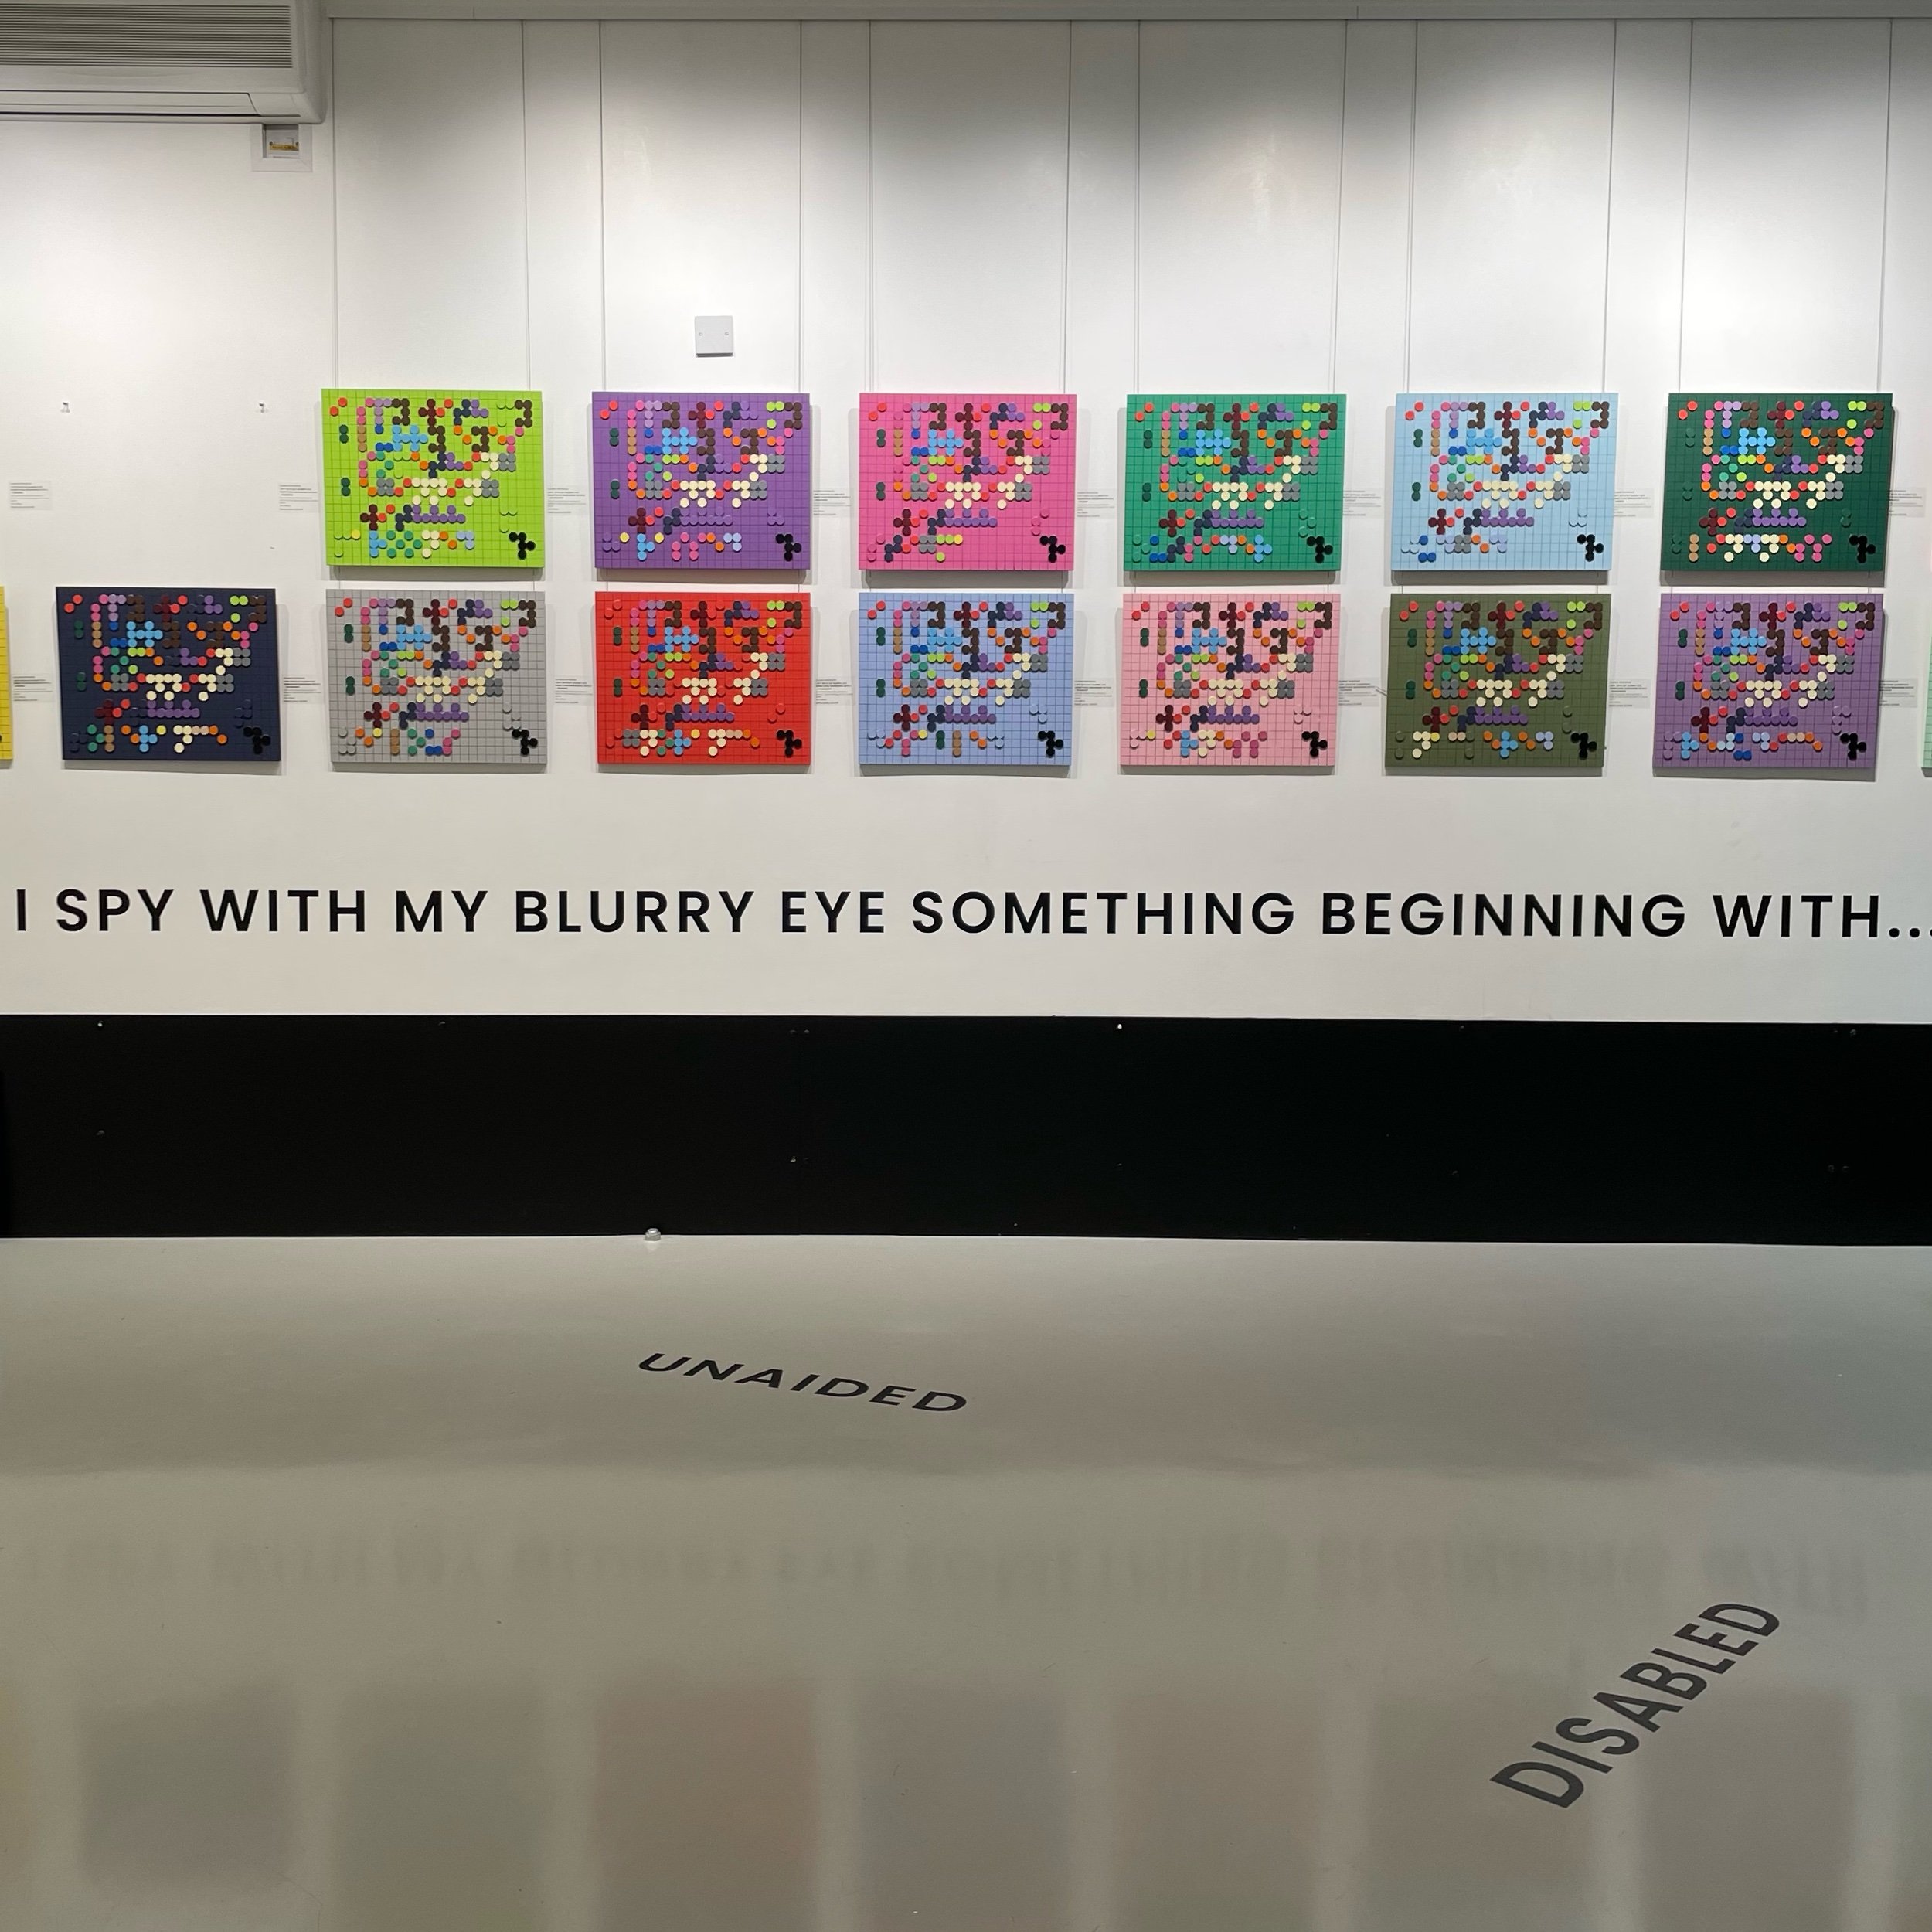 The series of works in the “I Spy” series